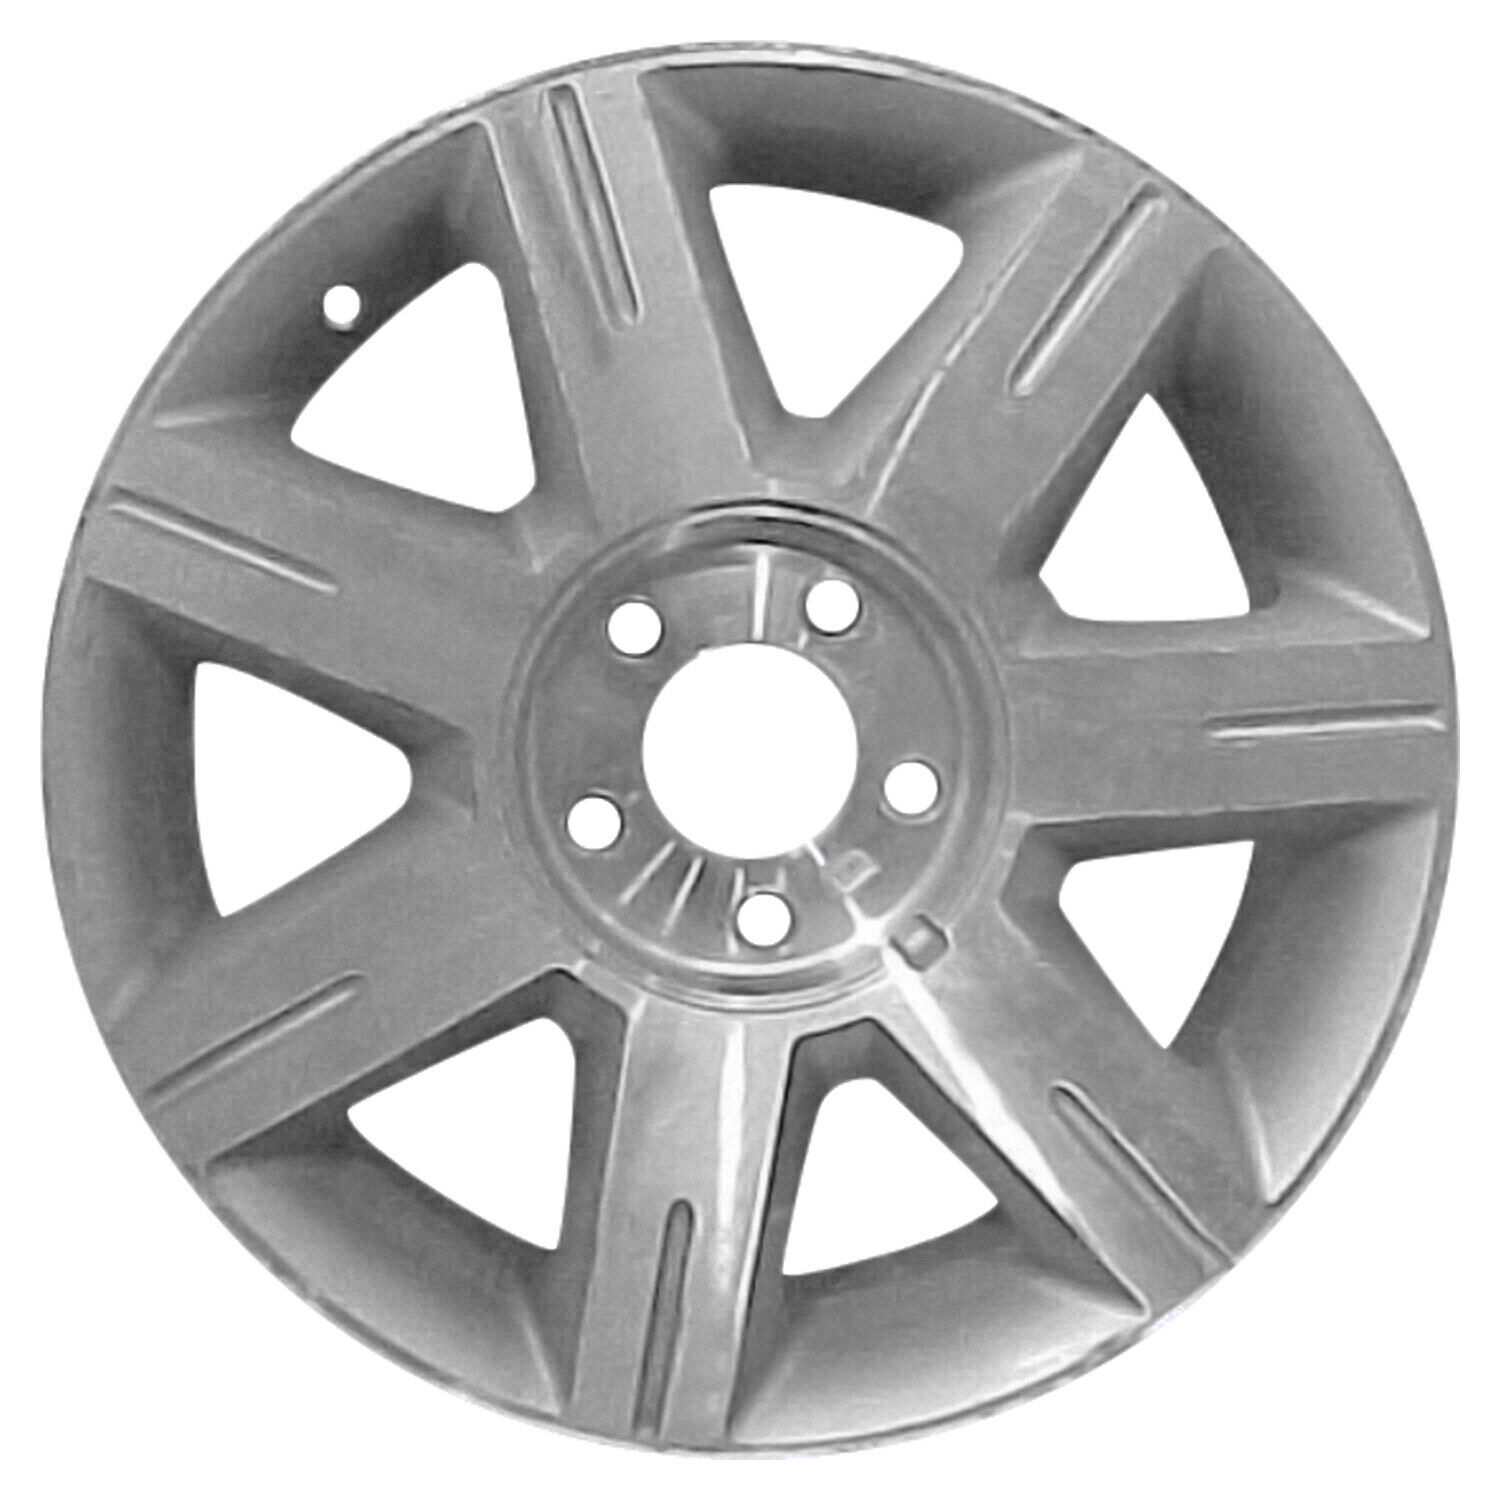 04600 Reconditioned OEM Aluminum Wheel 17x7 fits 2006-2008 Cadillac DTS